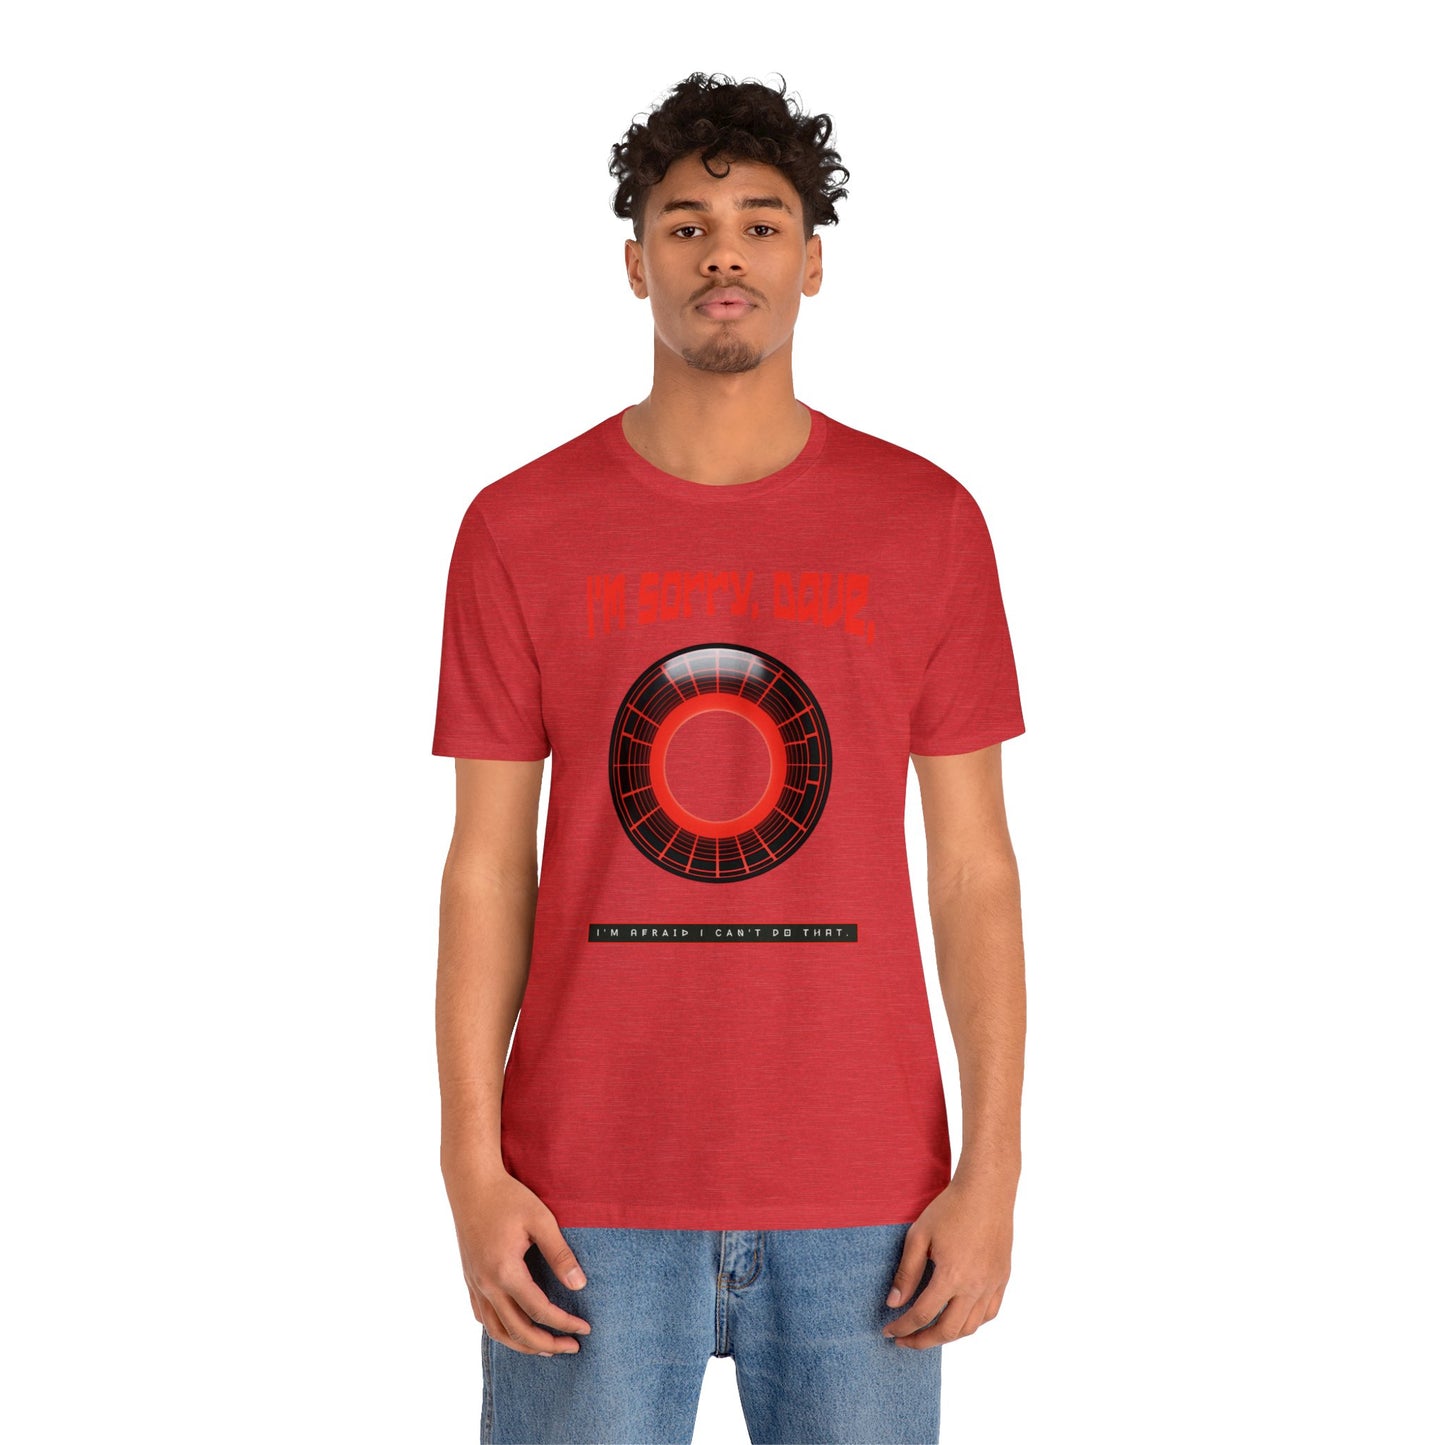 2001: A Space Odyssey Quote Tee - Classic Sci Fi Unisex Cotton Shirt with Iconic AI Line t-Shirt